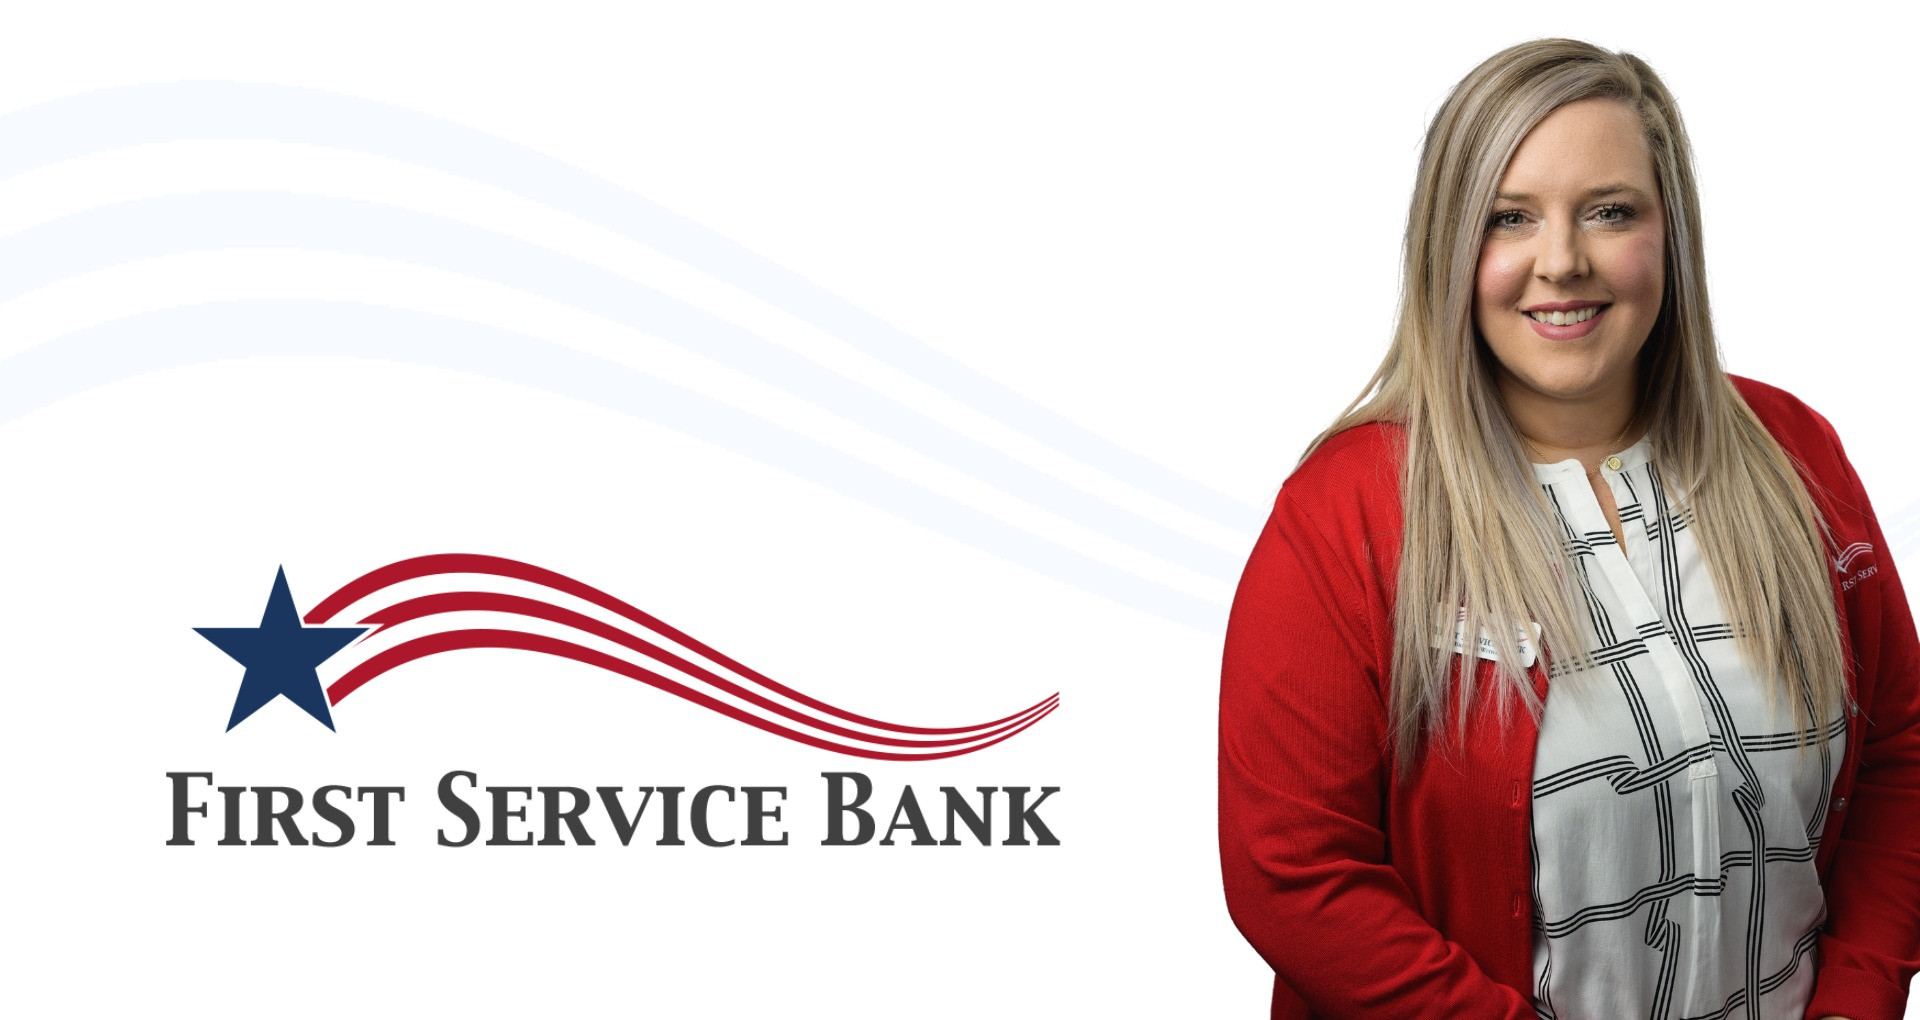 First Service Bank Appoints Brittany Witham as Vice President of Retail Operations